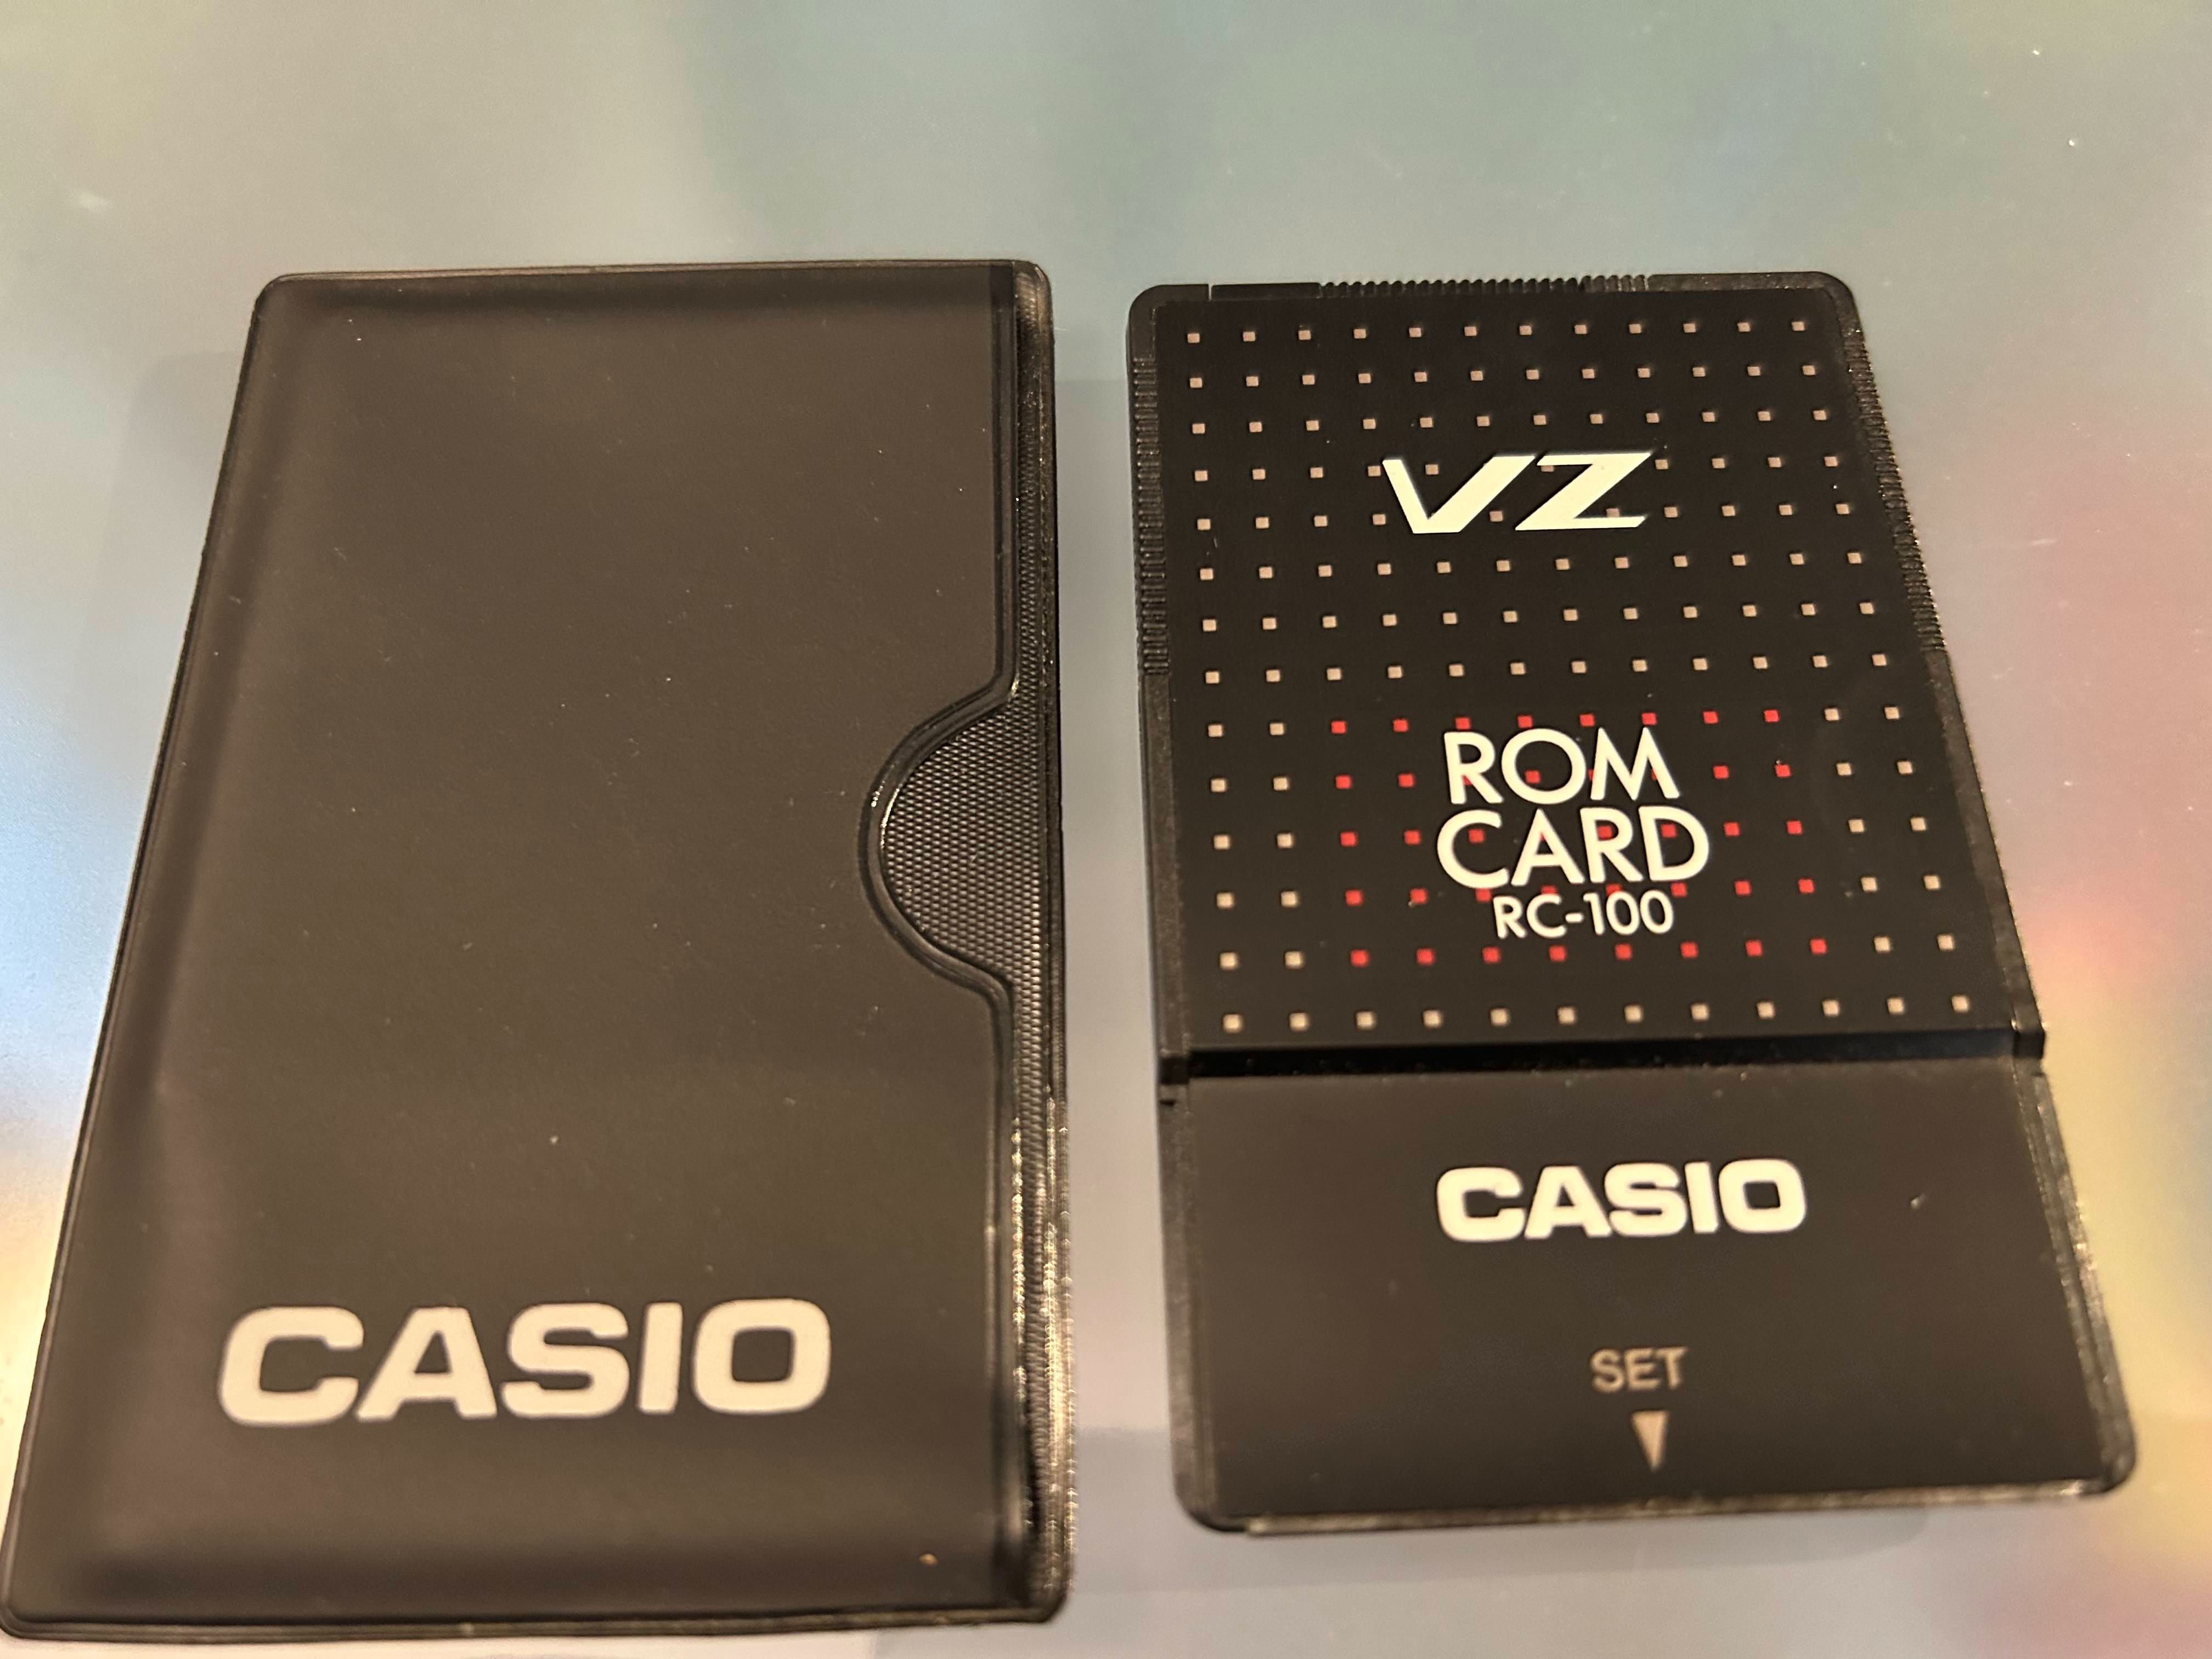 Casio RC-100 ROM Card for VZ